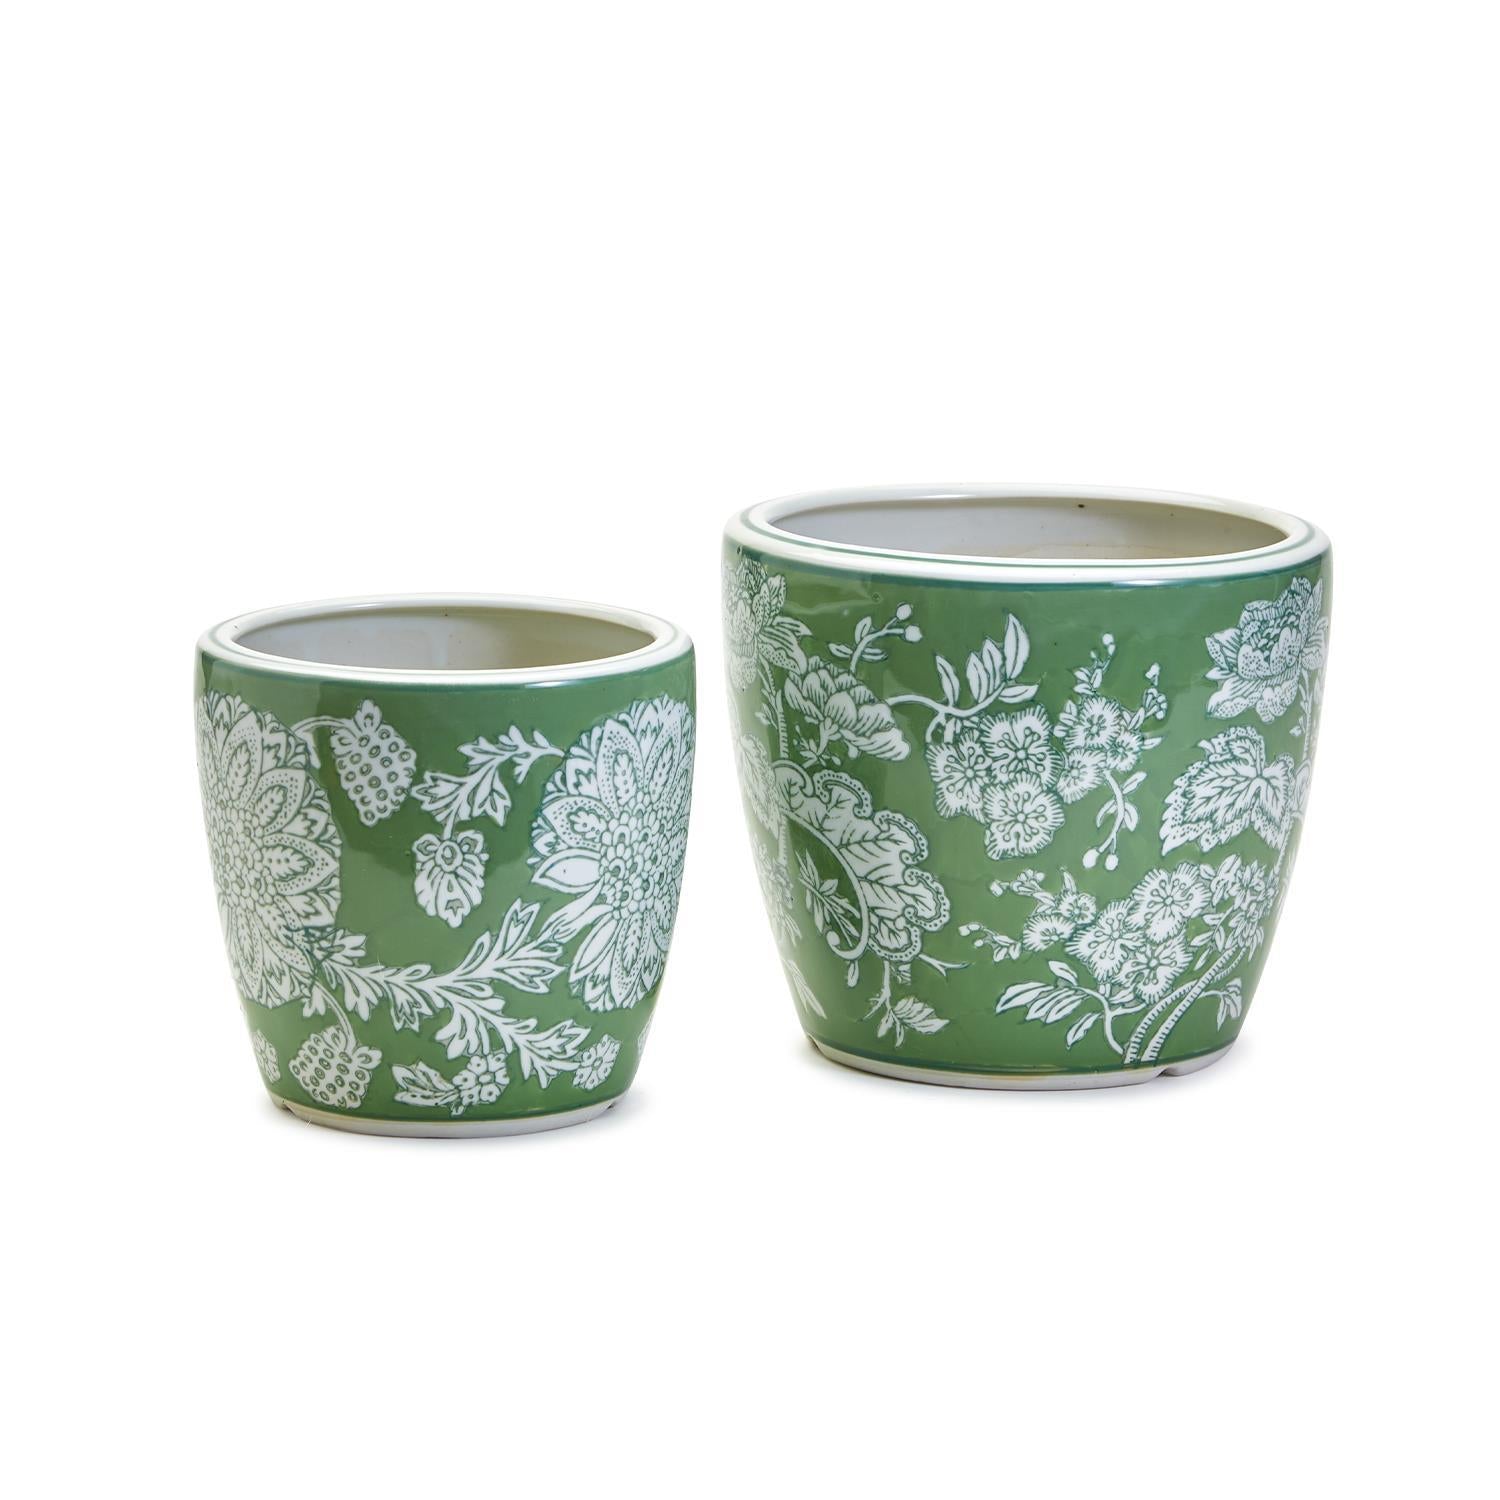 Two's Company Countryside S/2 Hand-Painted Cachepots / Planters